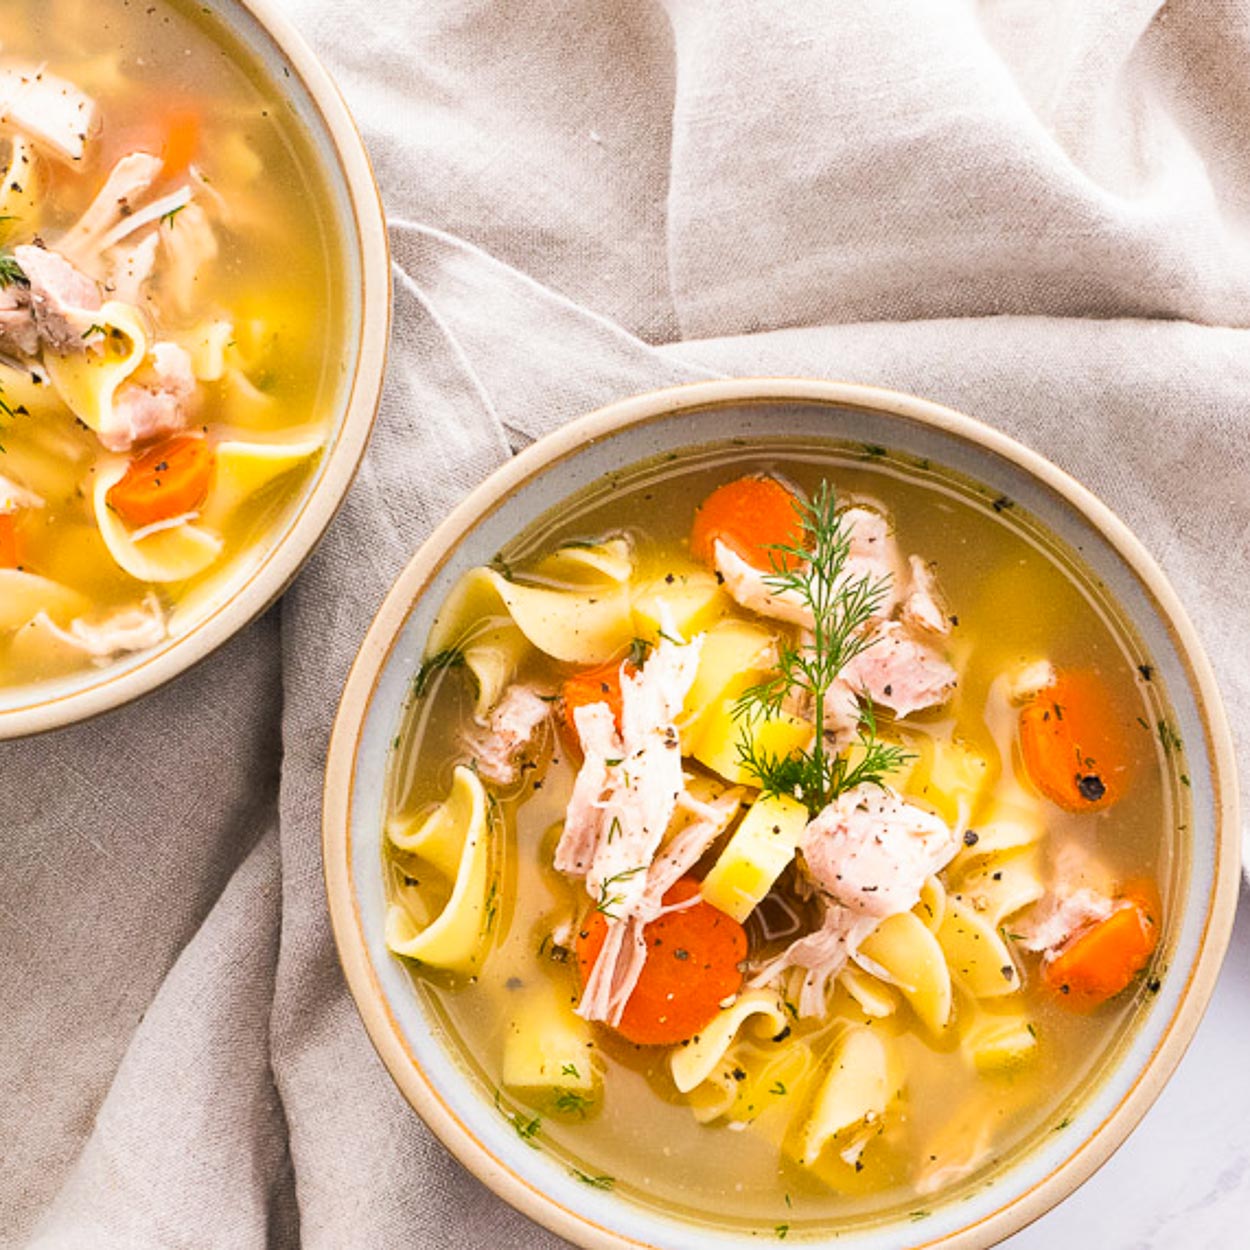 https://ifoodreal.com/wp-content/uploads/2022/01/fg-healthy-chicken-noodle-soup-recipe-2.jpg